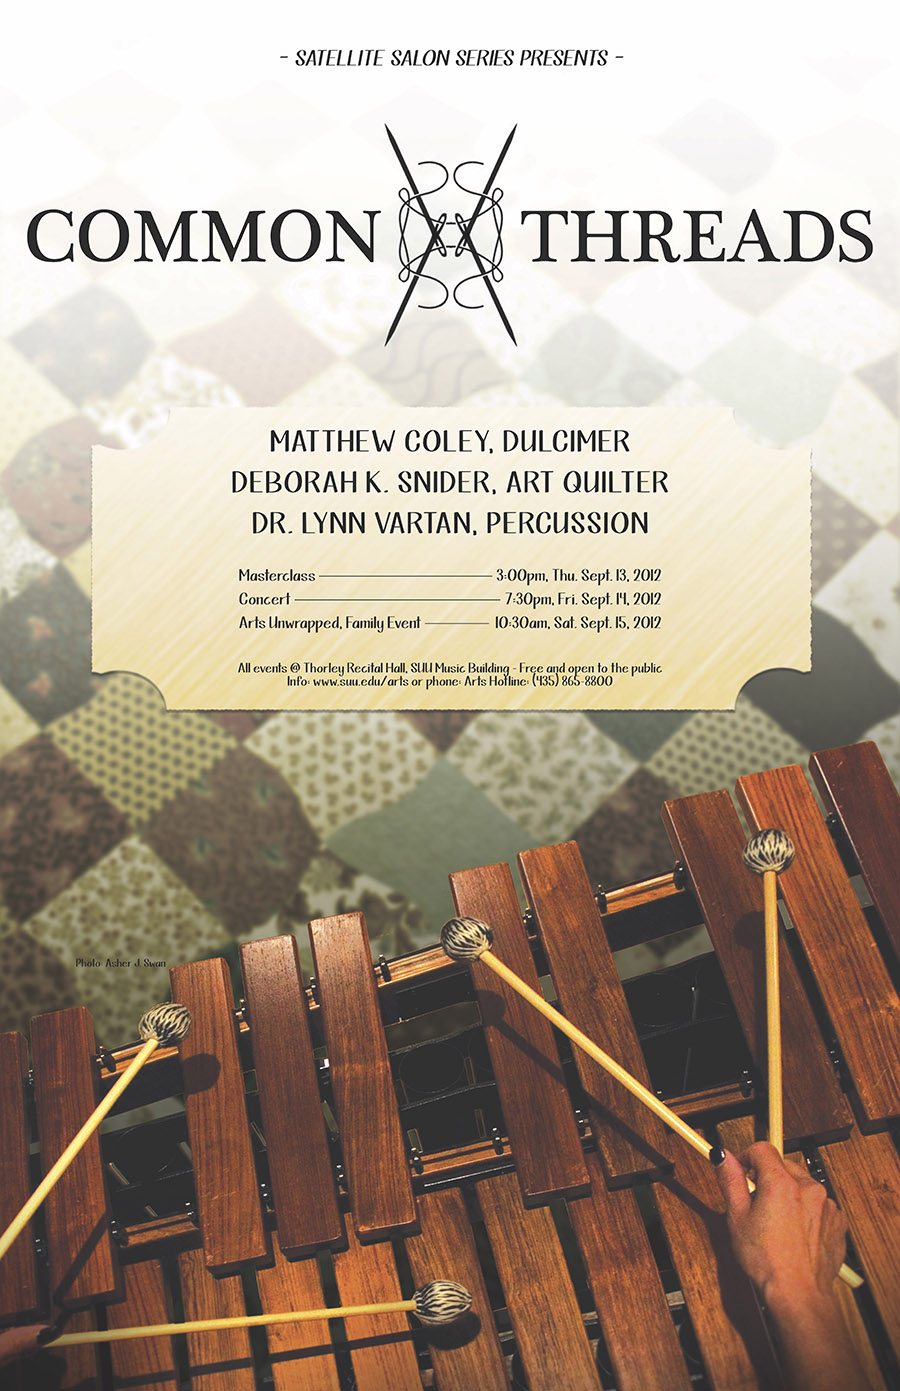 Common Threads - Matthew Coley and Deb Snider